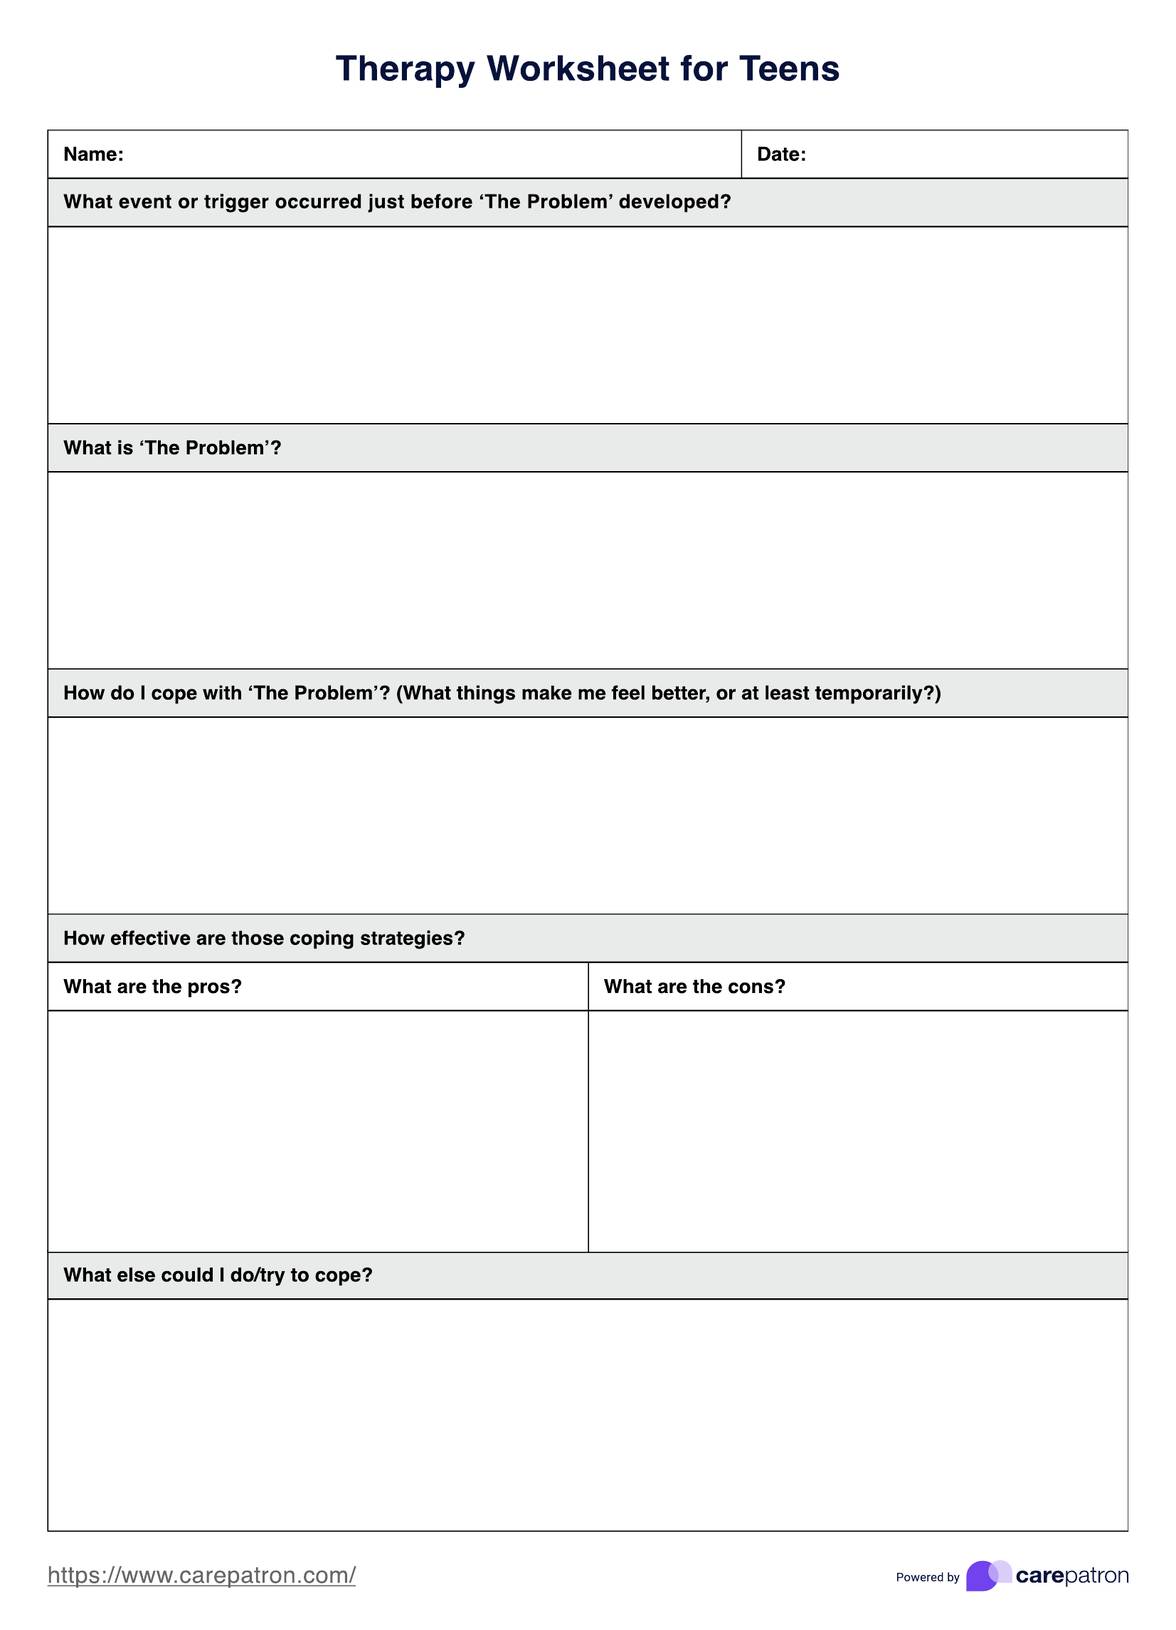 Therapy Worksheet For Teens PDF Example